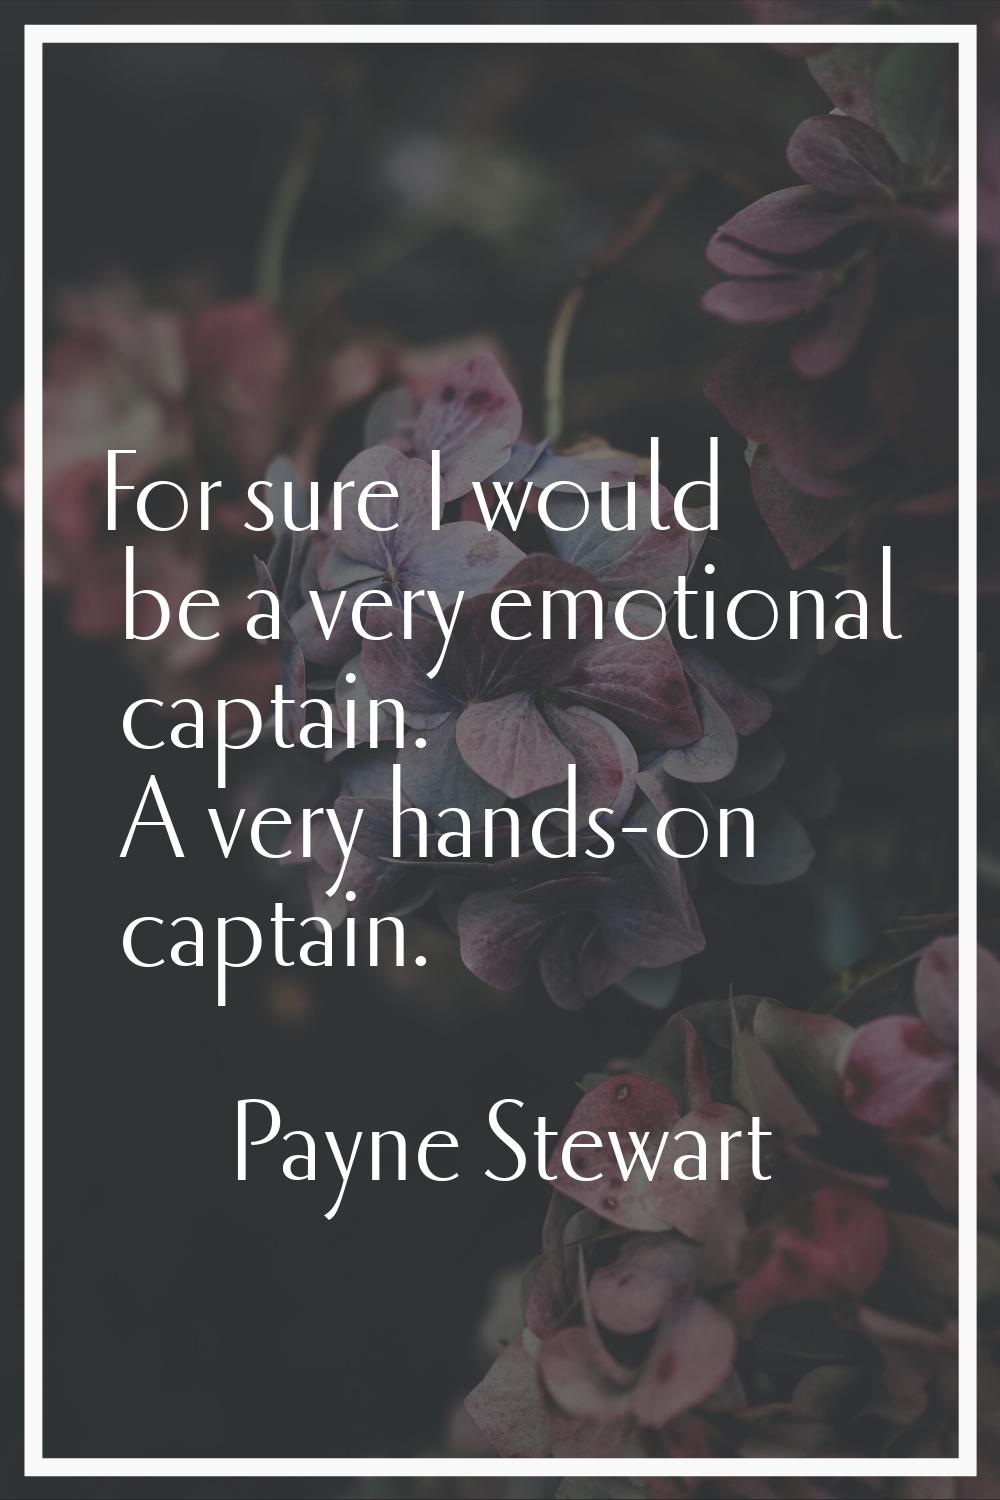 For sure I would be a very emotional captain. A very hands-on captain.